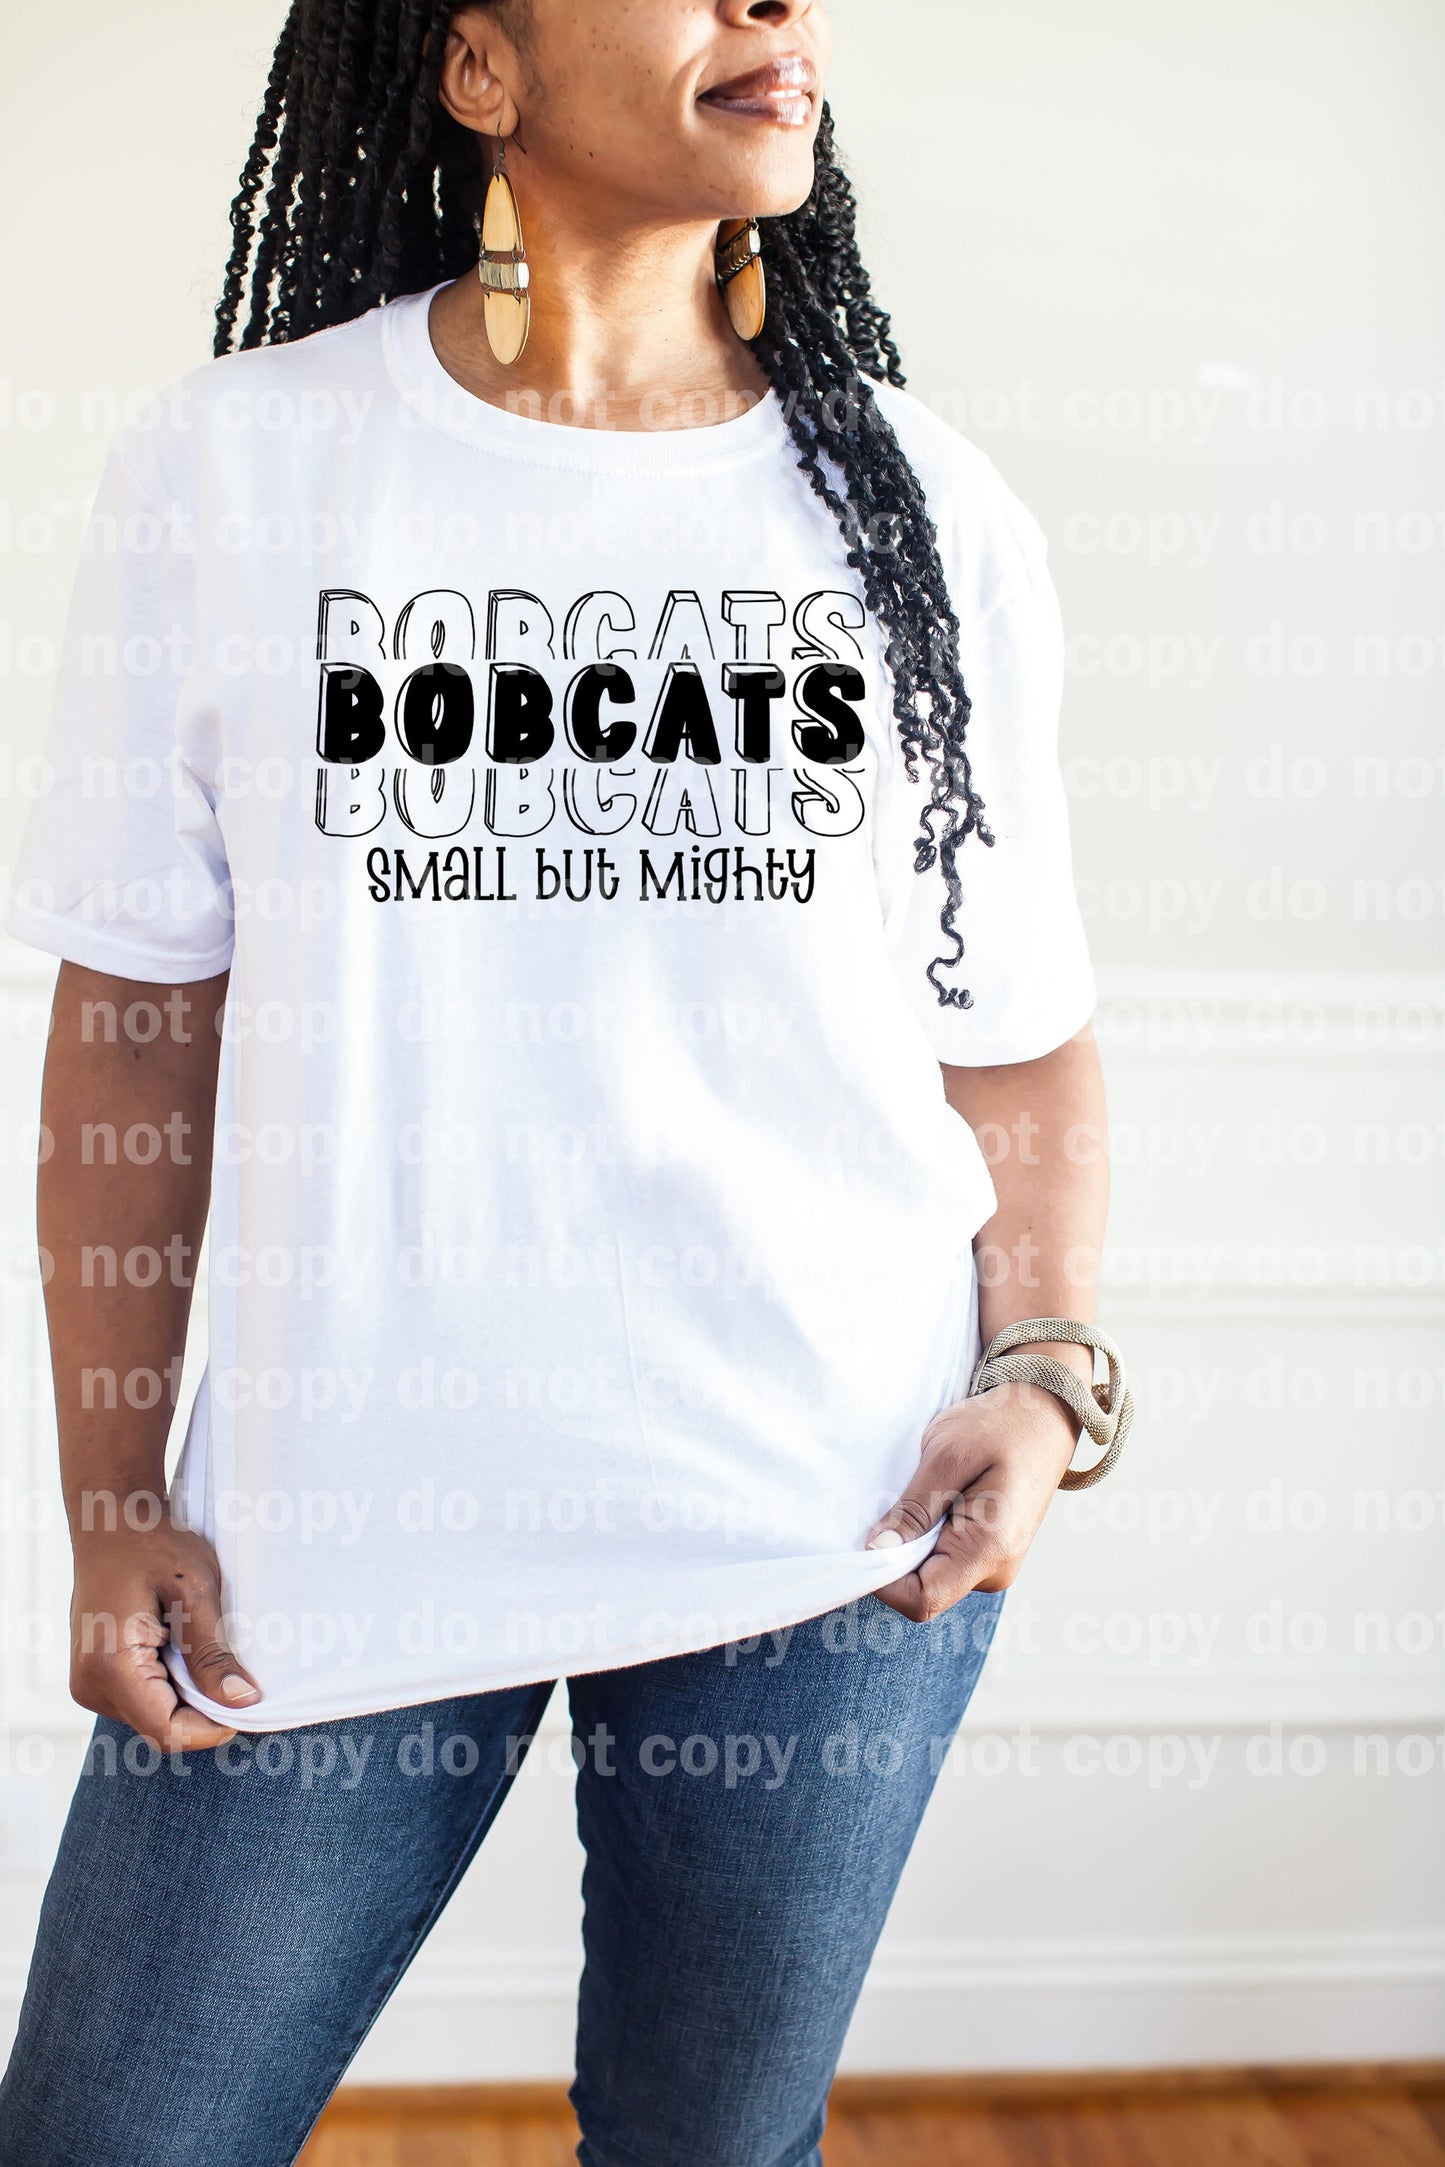 Bobcats Small But Mighty Black/White Dream Print or Sublimation Print